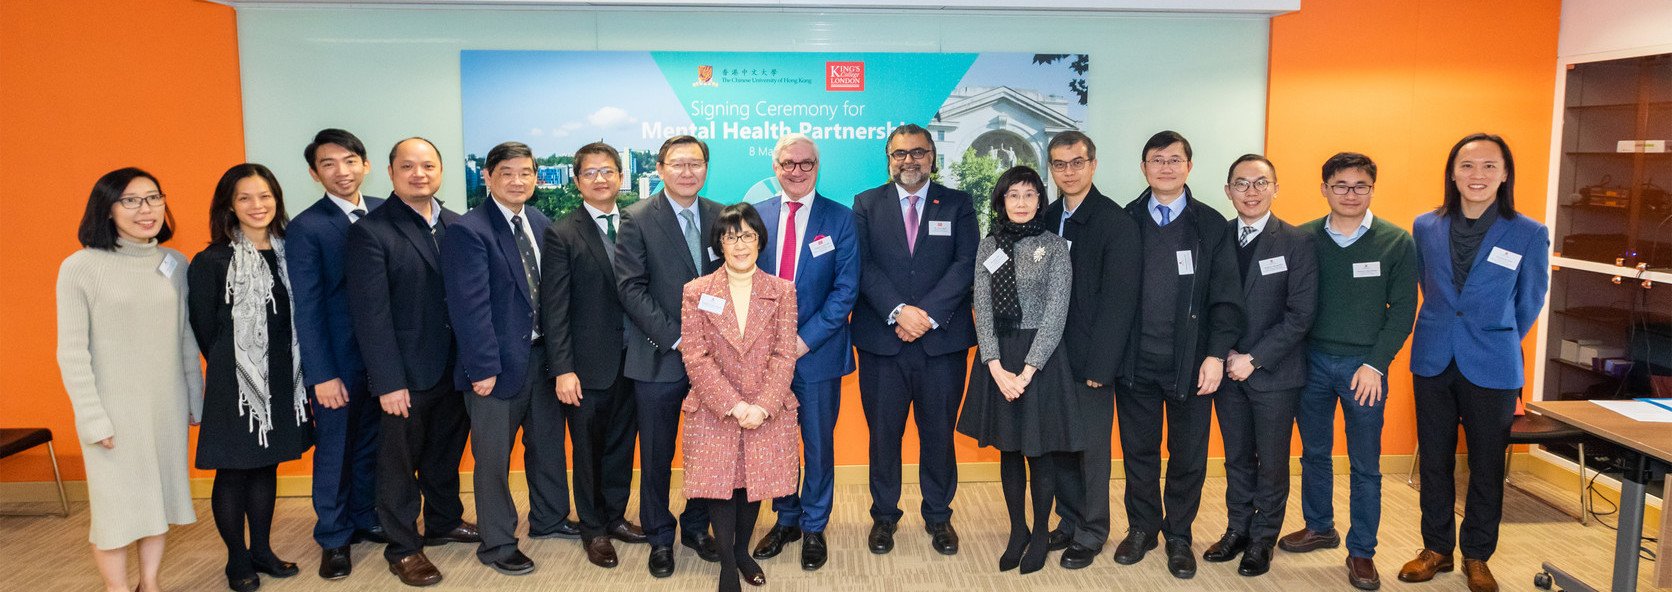 The joint work between CUHK and KCL engages expertise from across disciplines and different community sectors. Representatives from the healthcare sector at the ceremony include Ms. Annie Tam, Chairperson of the New Life Psychiatric Rehabilitation Association (sixth from right); Mr. Terry Wong, Acting CEO of New Life Psychiatric Rehabilitation Association (fifth from right); and Dr. David Y.K. Lau, Chairman of Mental Health Foundation (sixth from left).